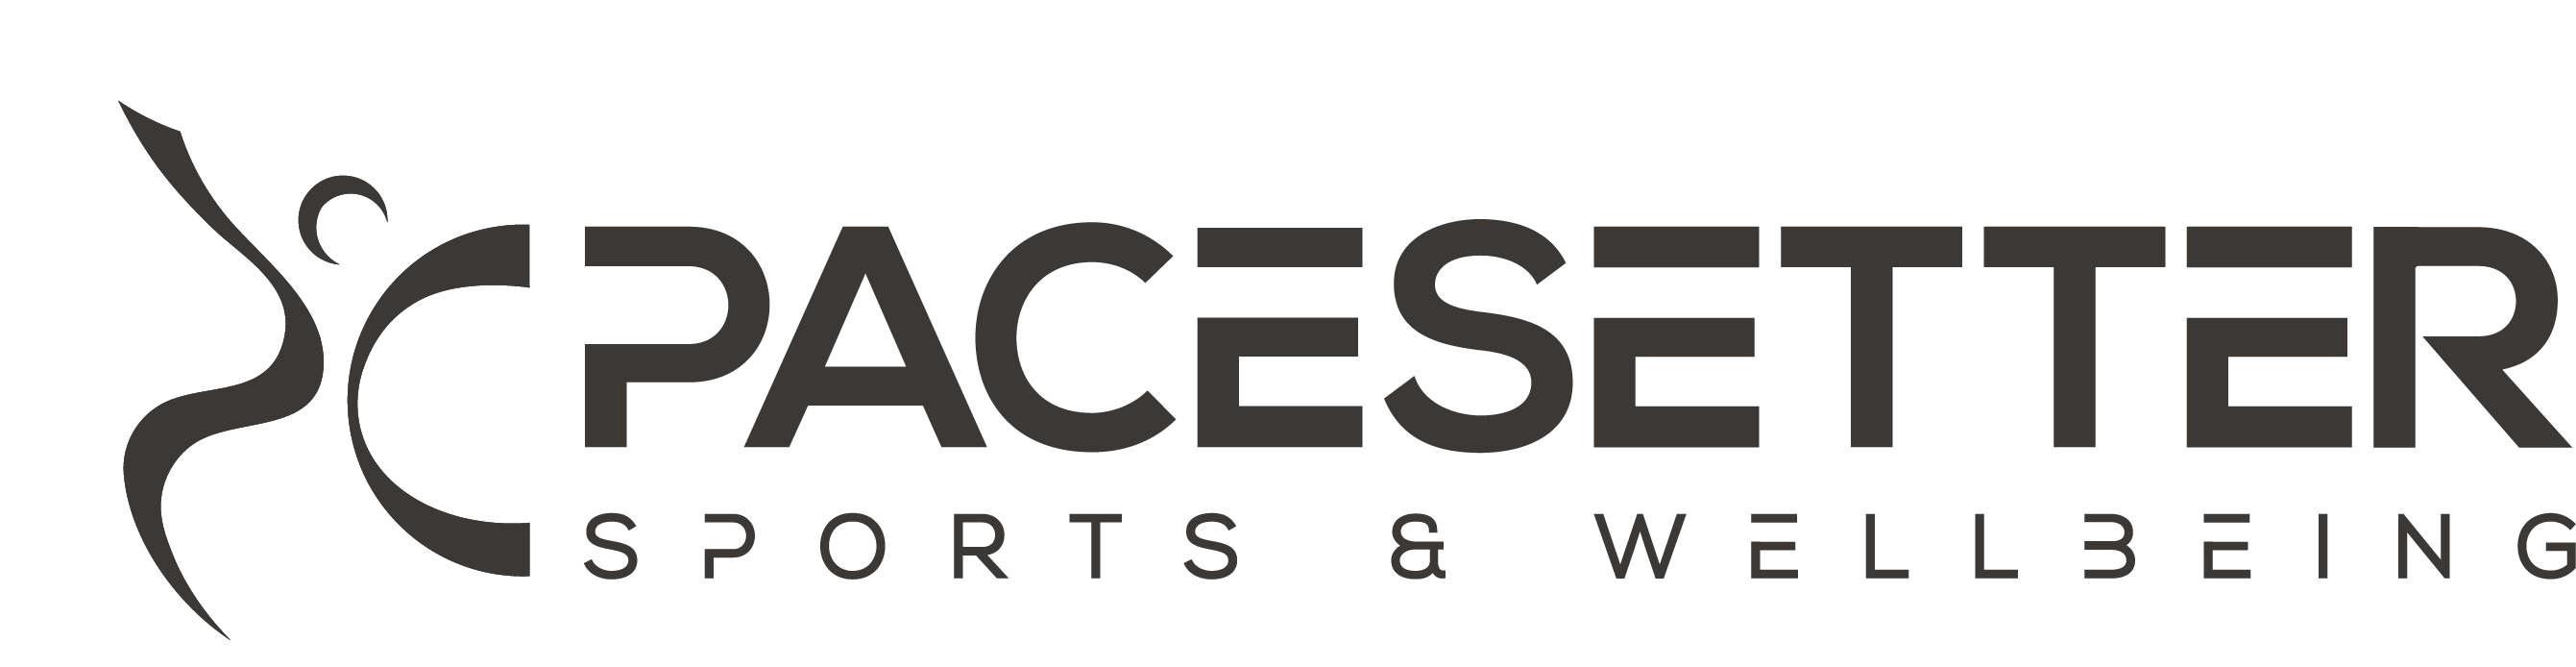 Pacesetter Sports & Wellbeing Limited